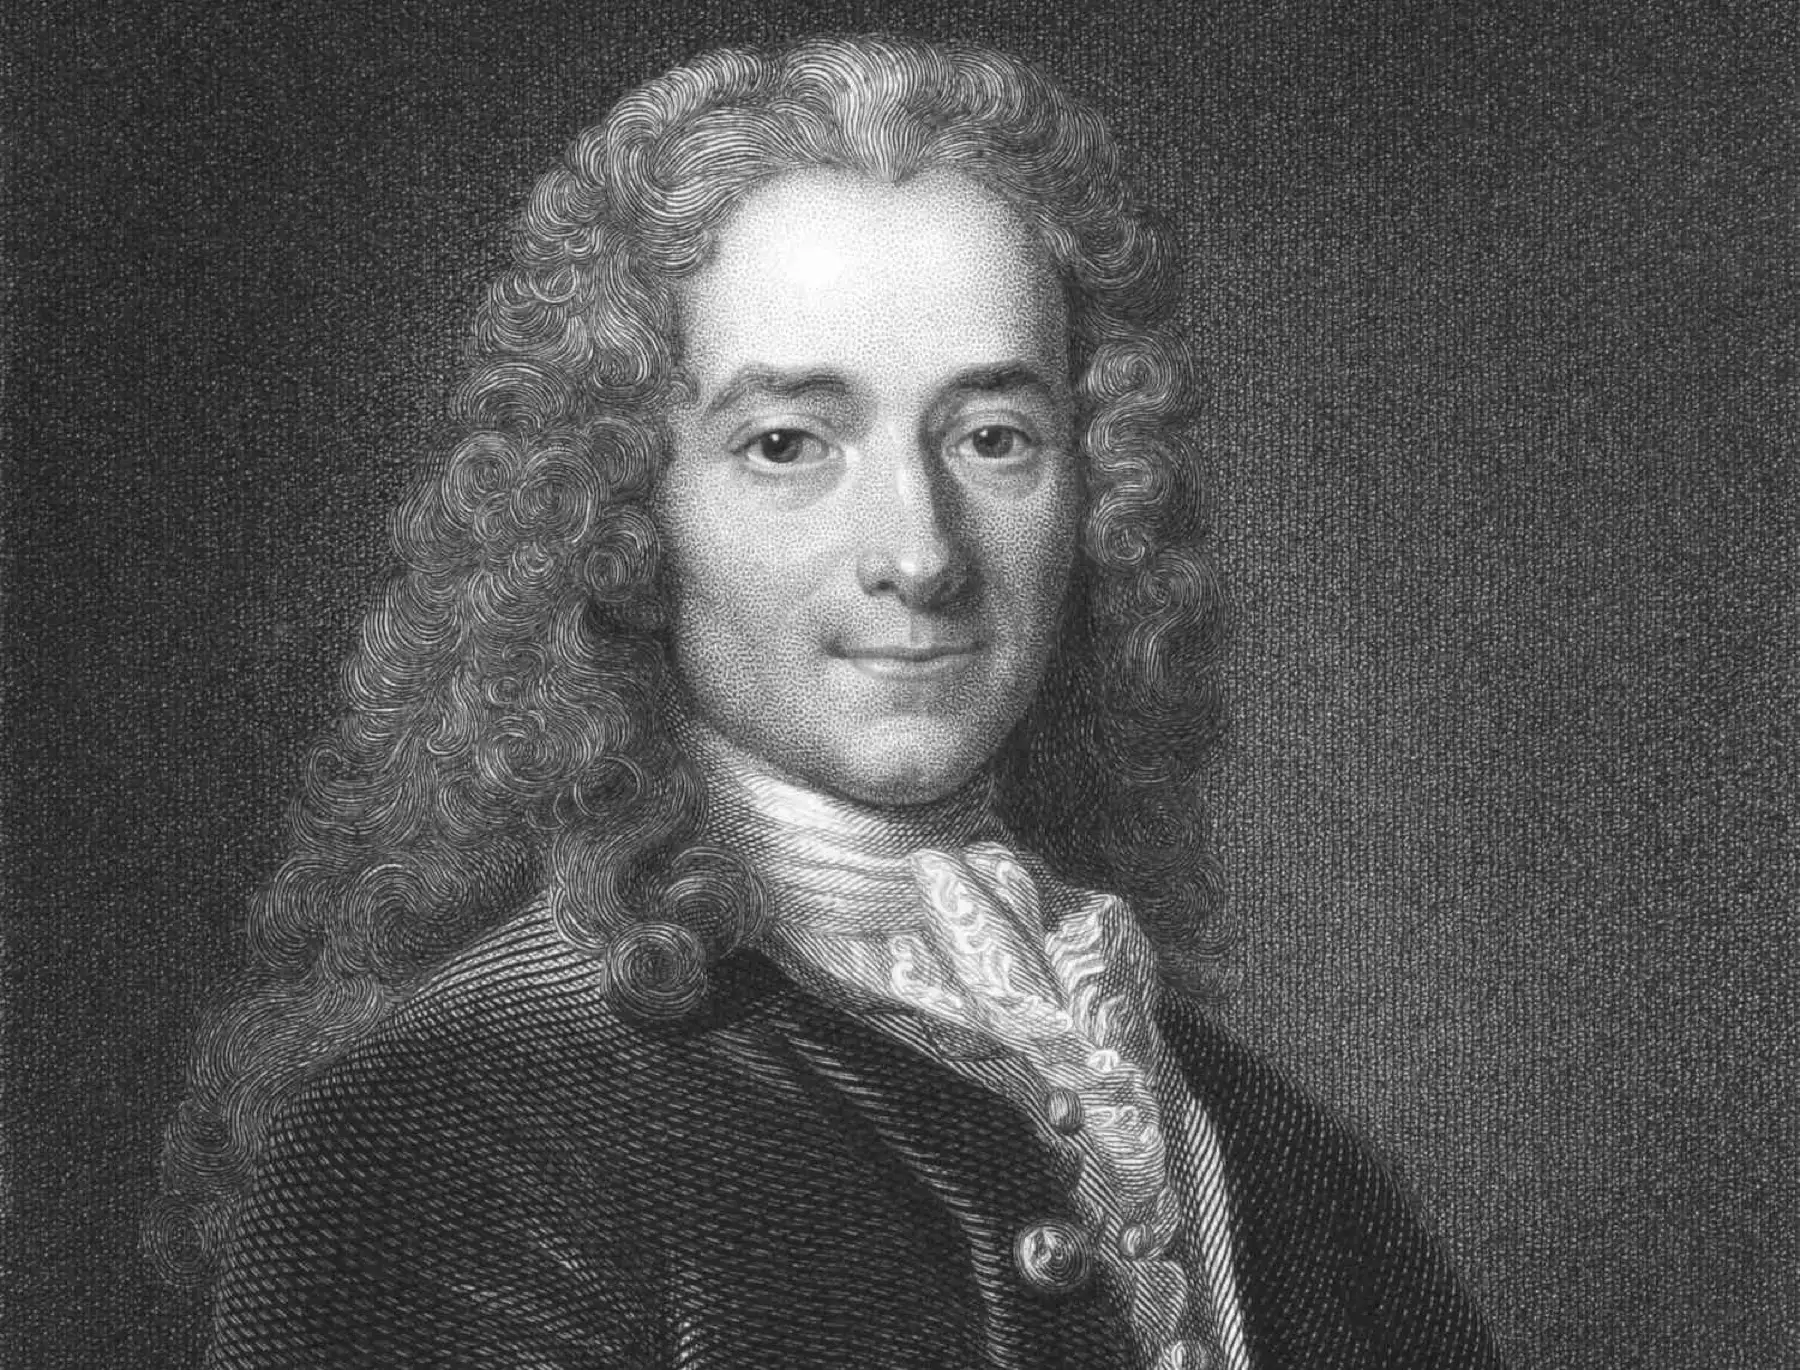 Photo or rendering of Voltaire